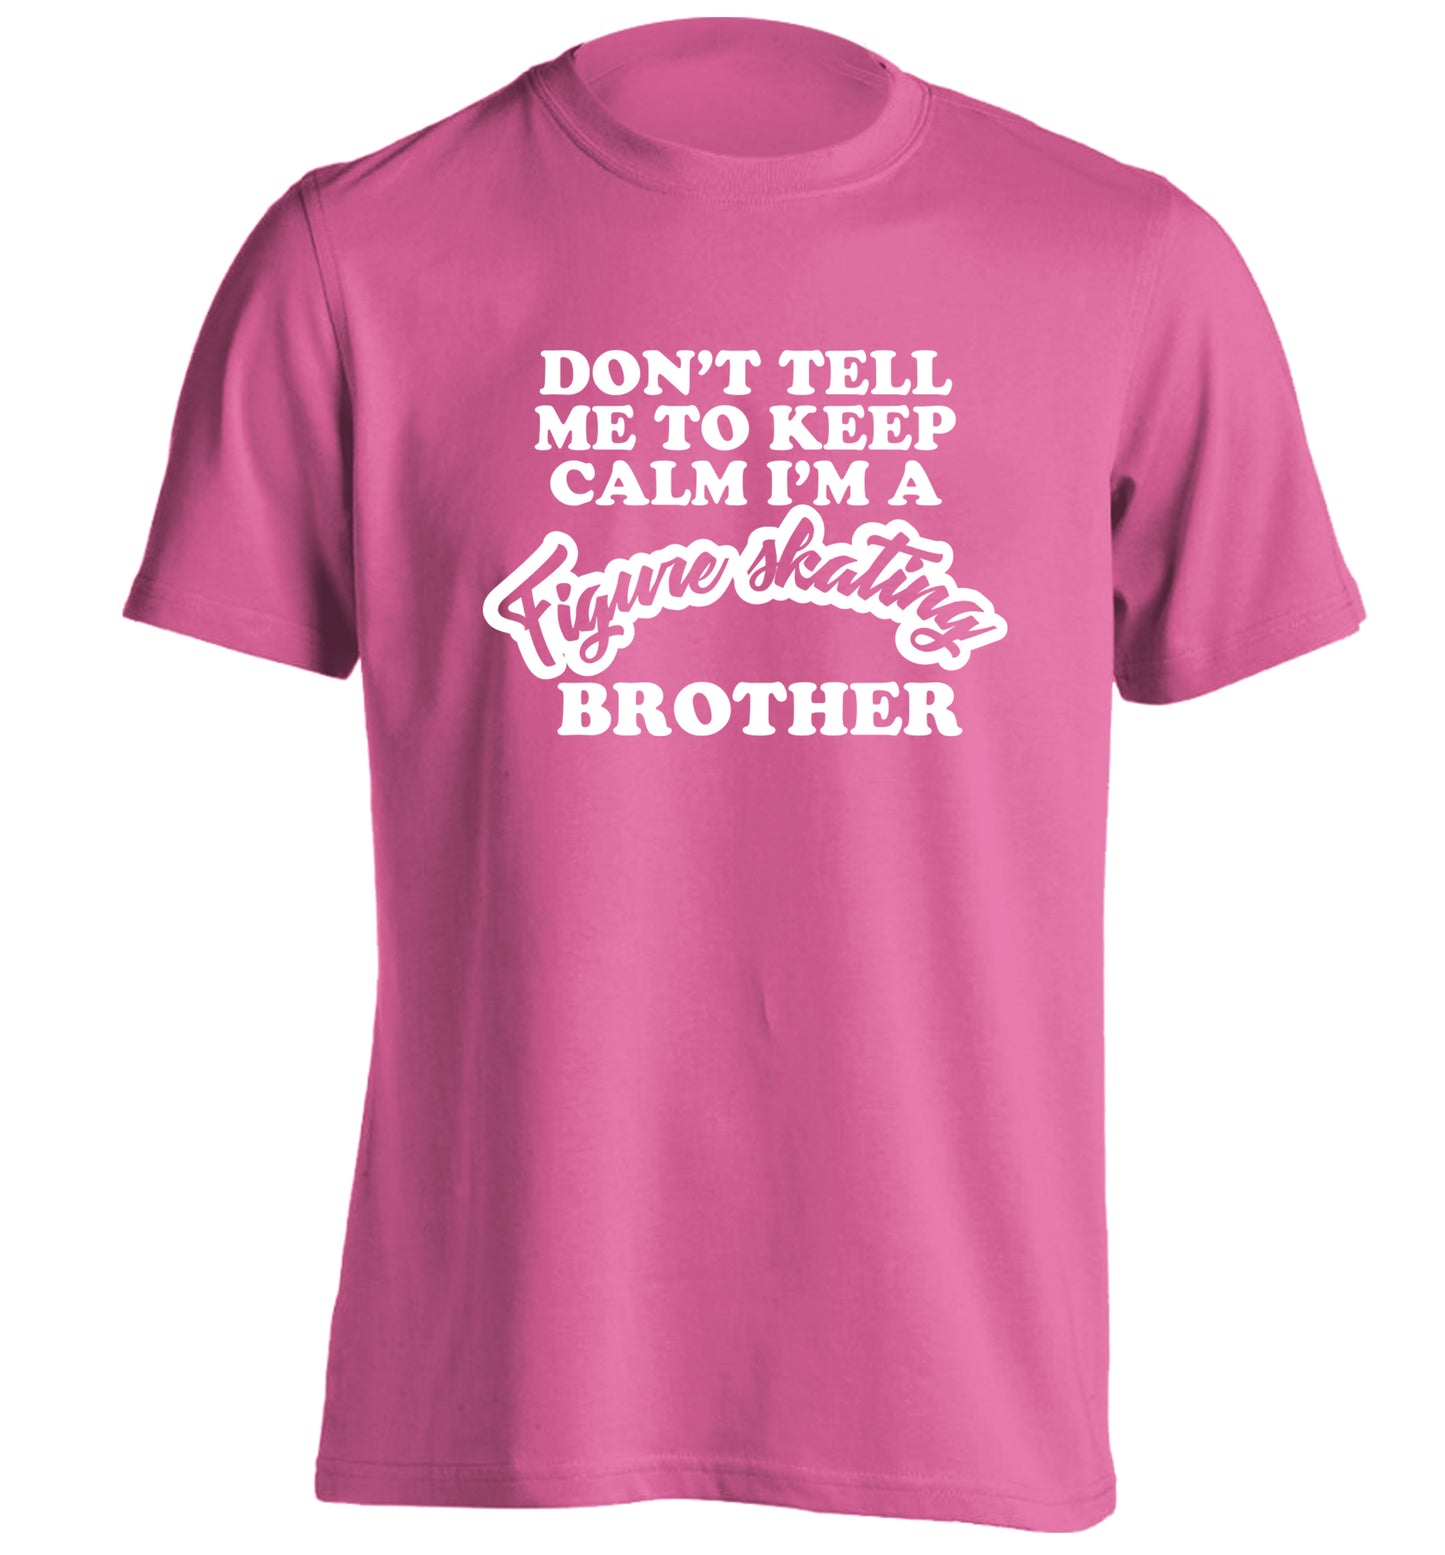 Don't tell me to keep calm I'm a figure skating brother adults unisexpink Tshirt 2XL